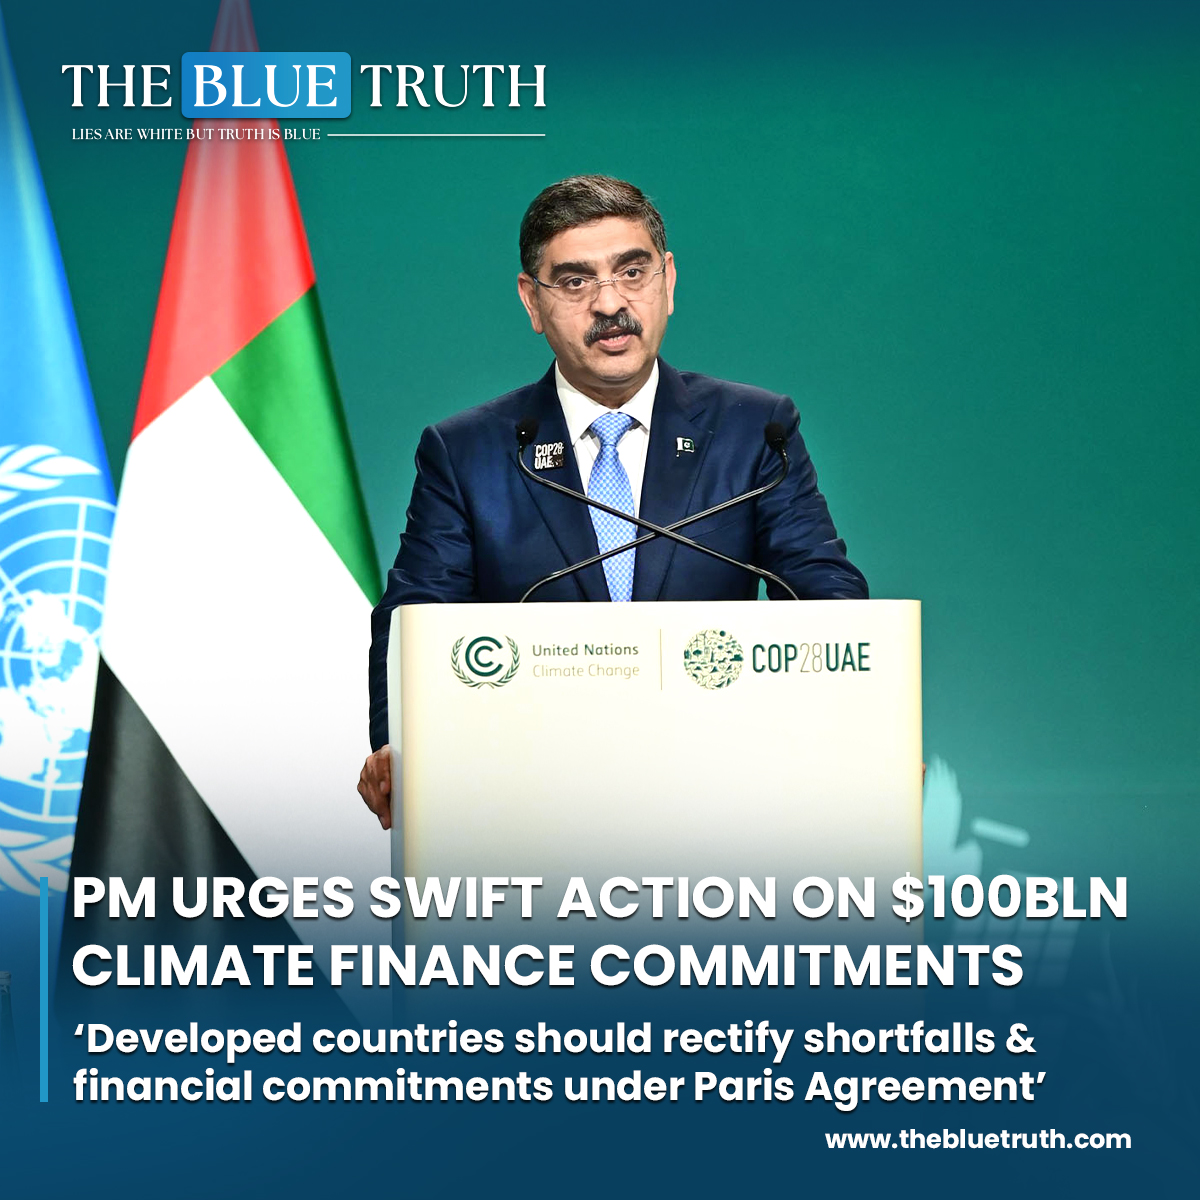 PM Kakar urges swift action on $100bln climate finance commitments.
He called upon developed countries to urgently rectify shortfalls & financial commitments under Paris Agreement

#ClimateFinance #COP28Outcomes #PMKakar #ClimateJustice #TBT #TheBlueTruth